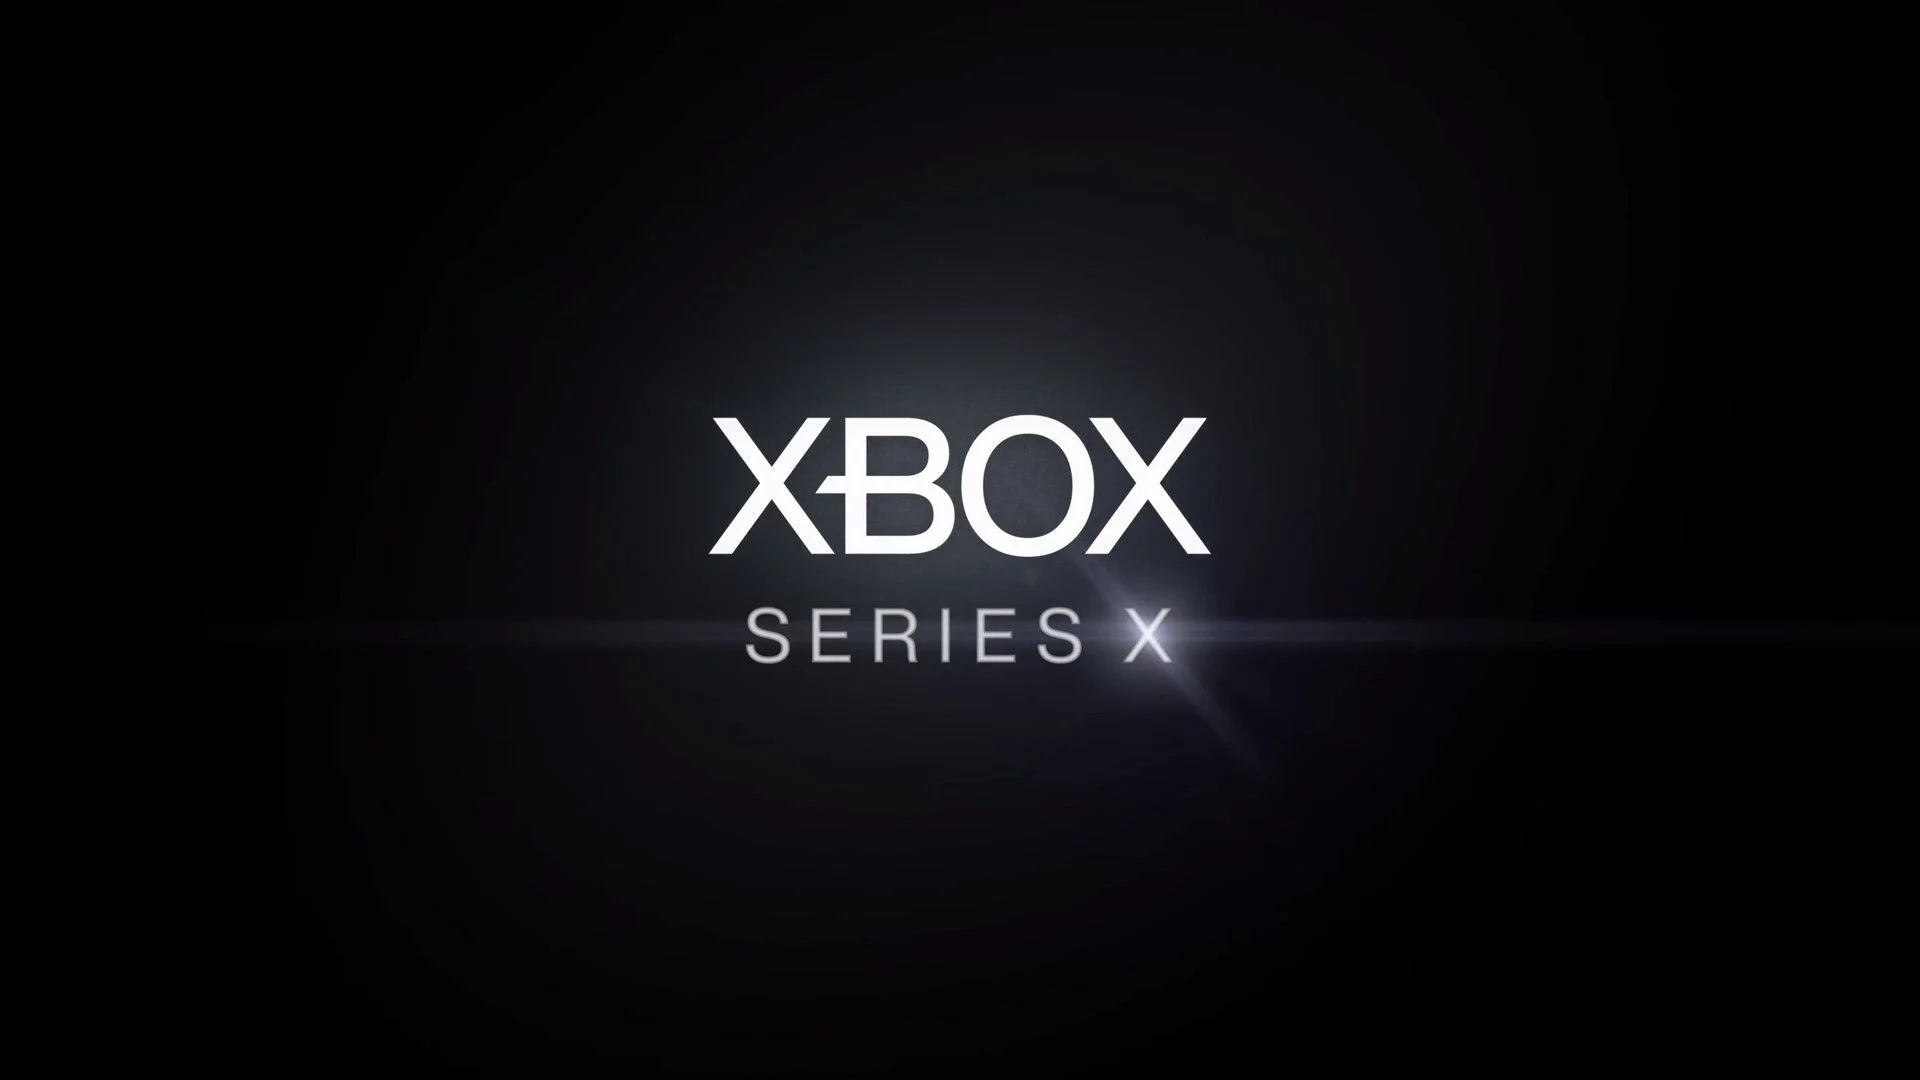 Xbox’s Phil Spencer addresses leaks, will share “real plans” when ready